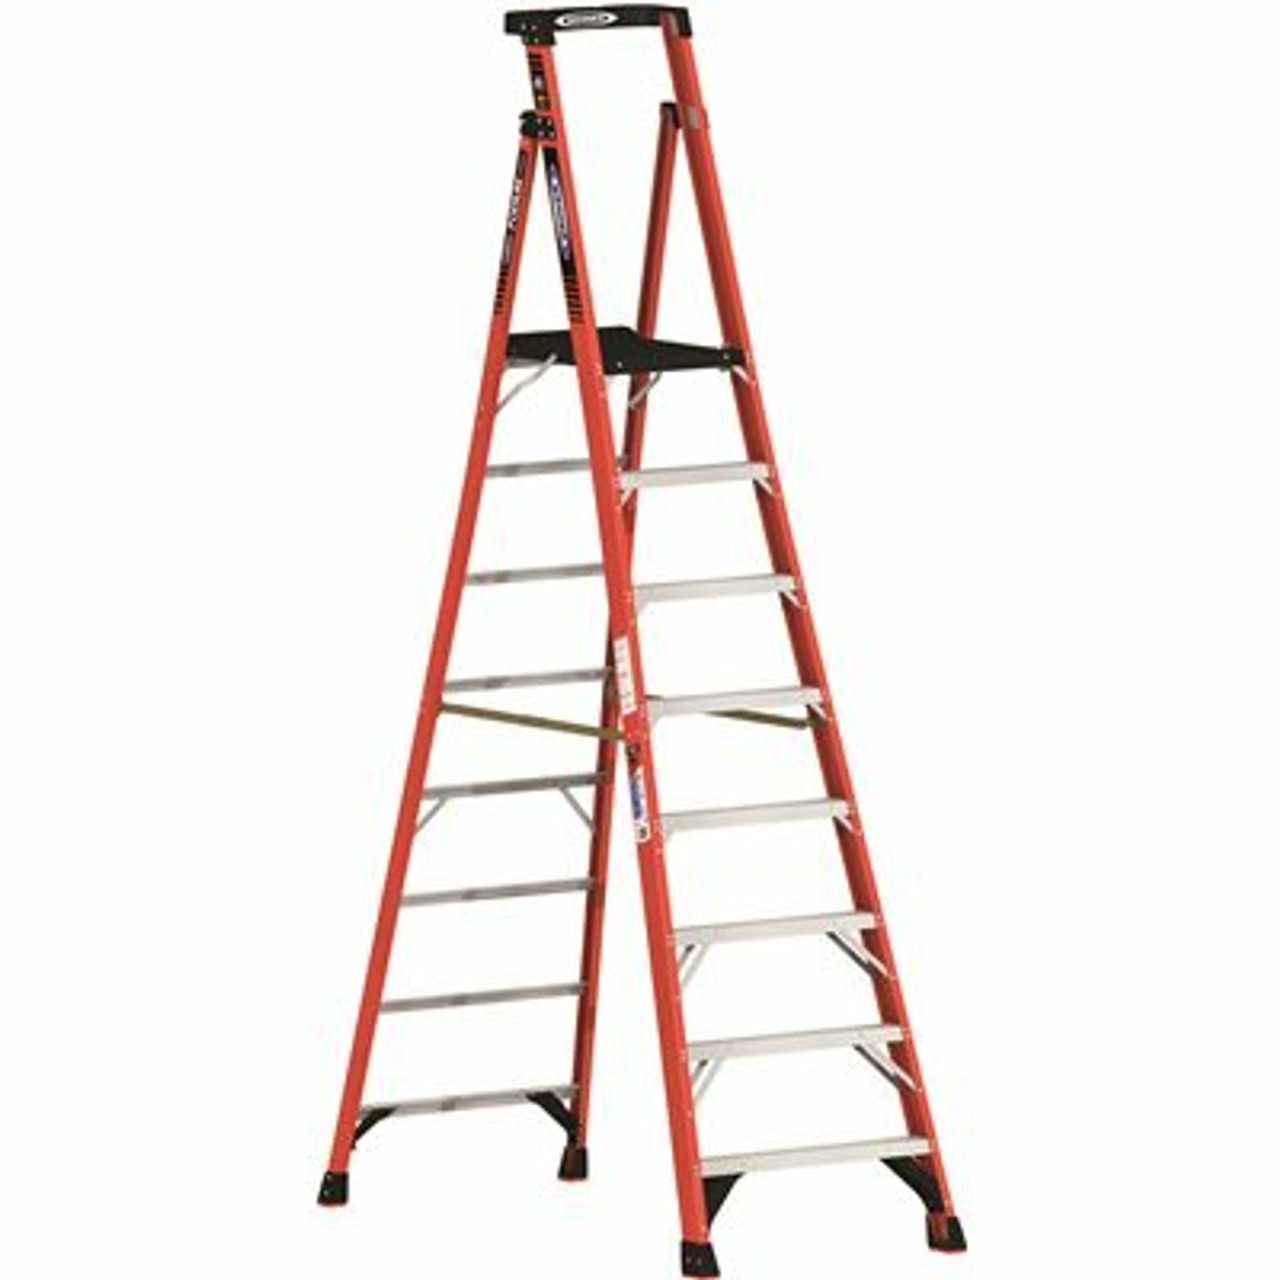 Werner 8 Ft. Fiberglass Podium Step Ladder ( 14 Ft. Reach Height) With 300 Lbs. Load Capacity Type Ia Duty Rating